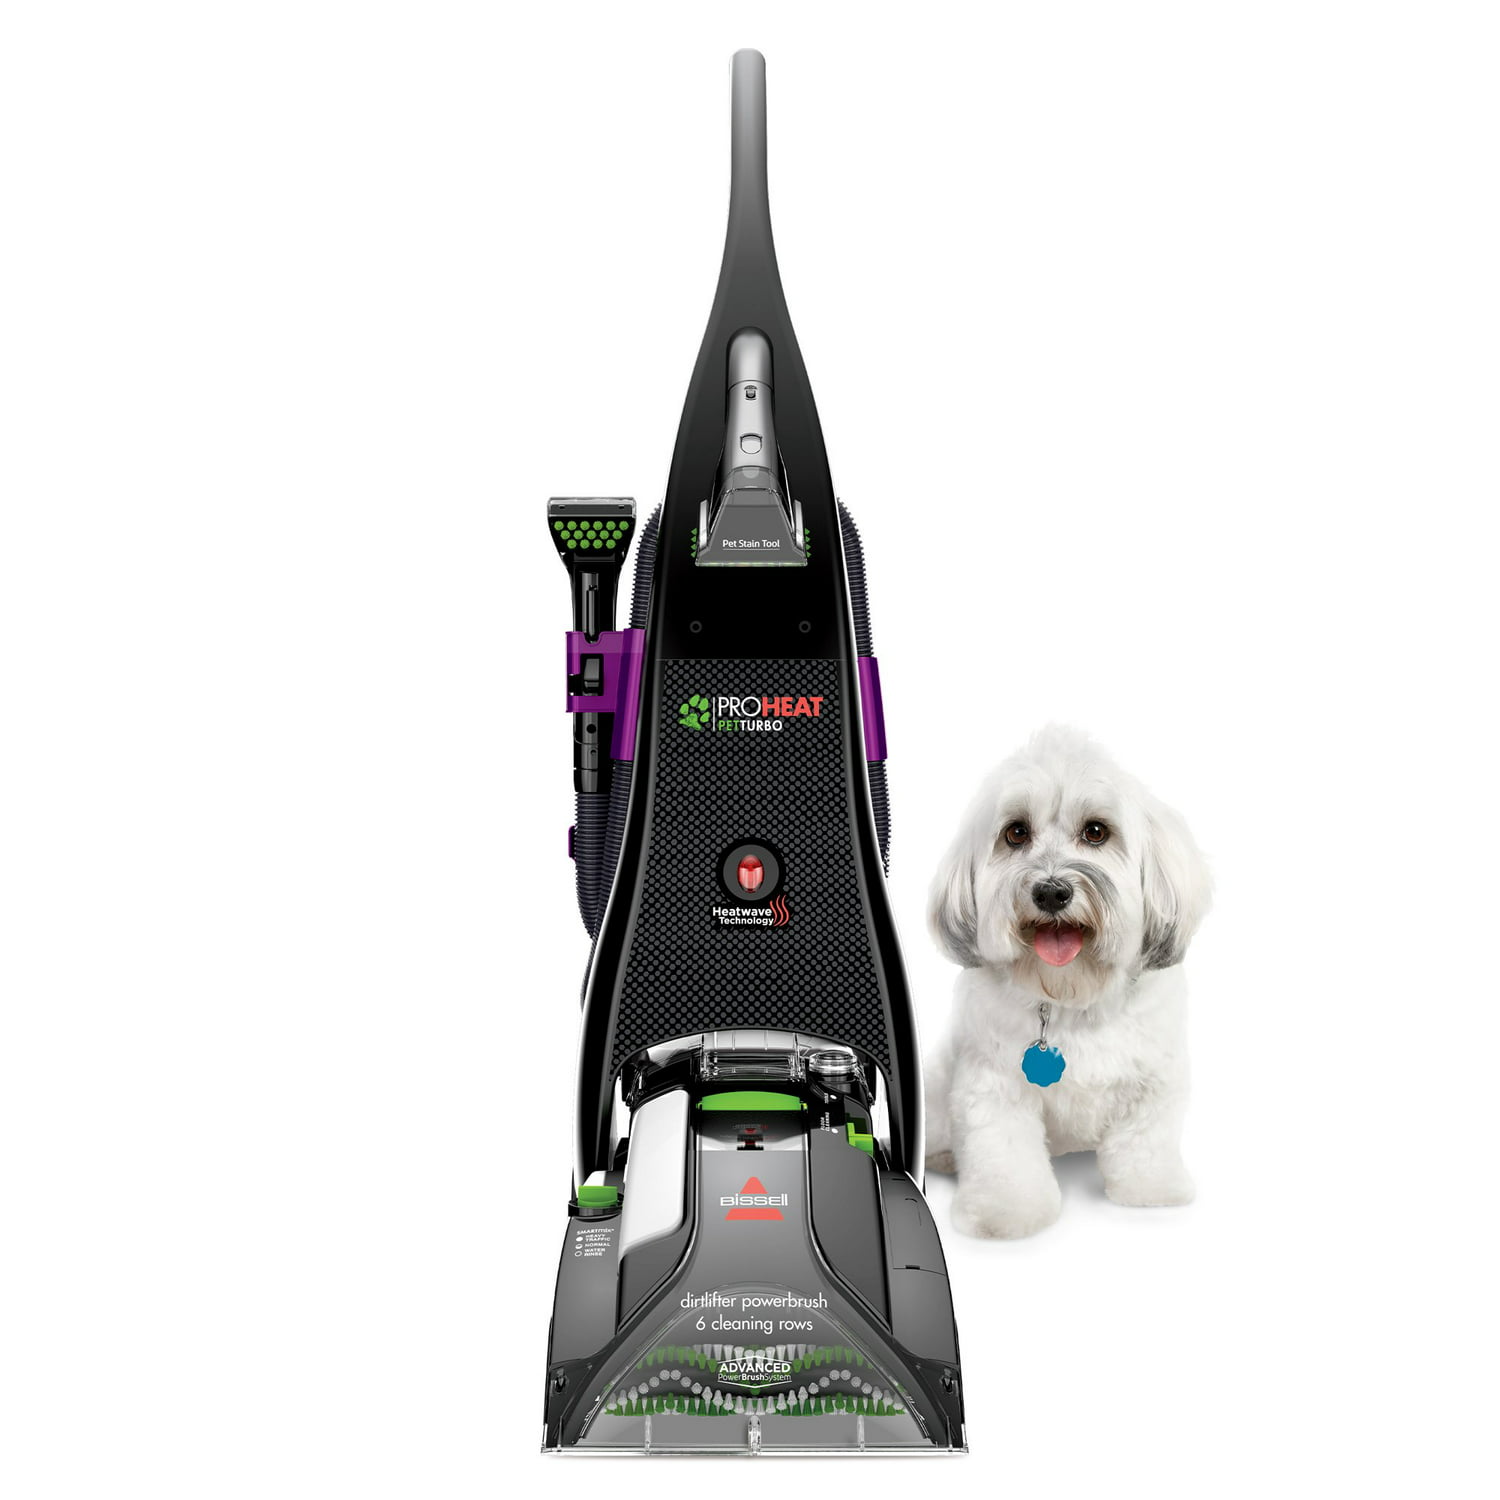 Bissell Proheat Pet Turbo Carpet Cleaner w/ Pet Stain Tool $129 + Free Shipping